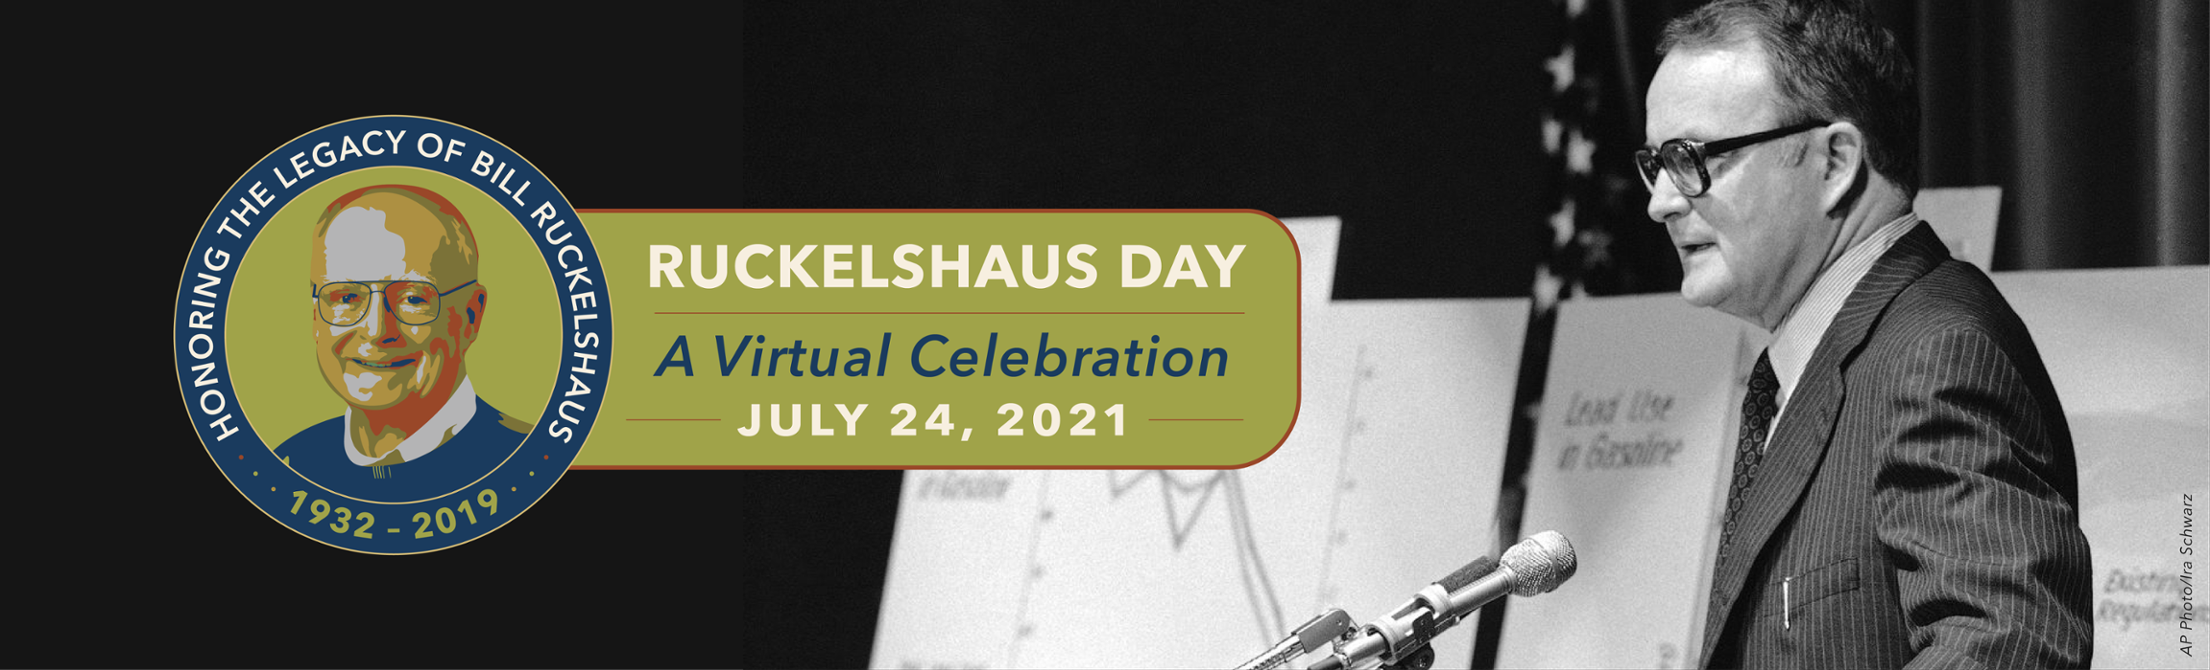 Banner with portrait of Ruckelshaus and words RUCKELSHAUS DAY: Honoring the Legacy of Bill Ruckelshaus